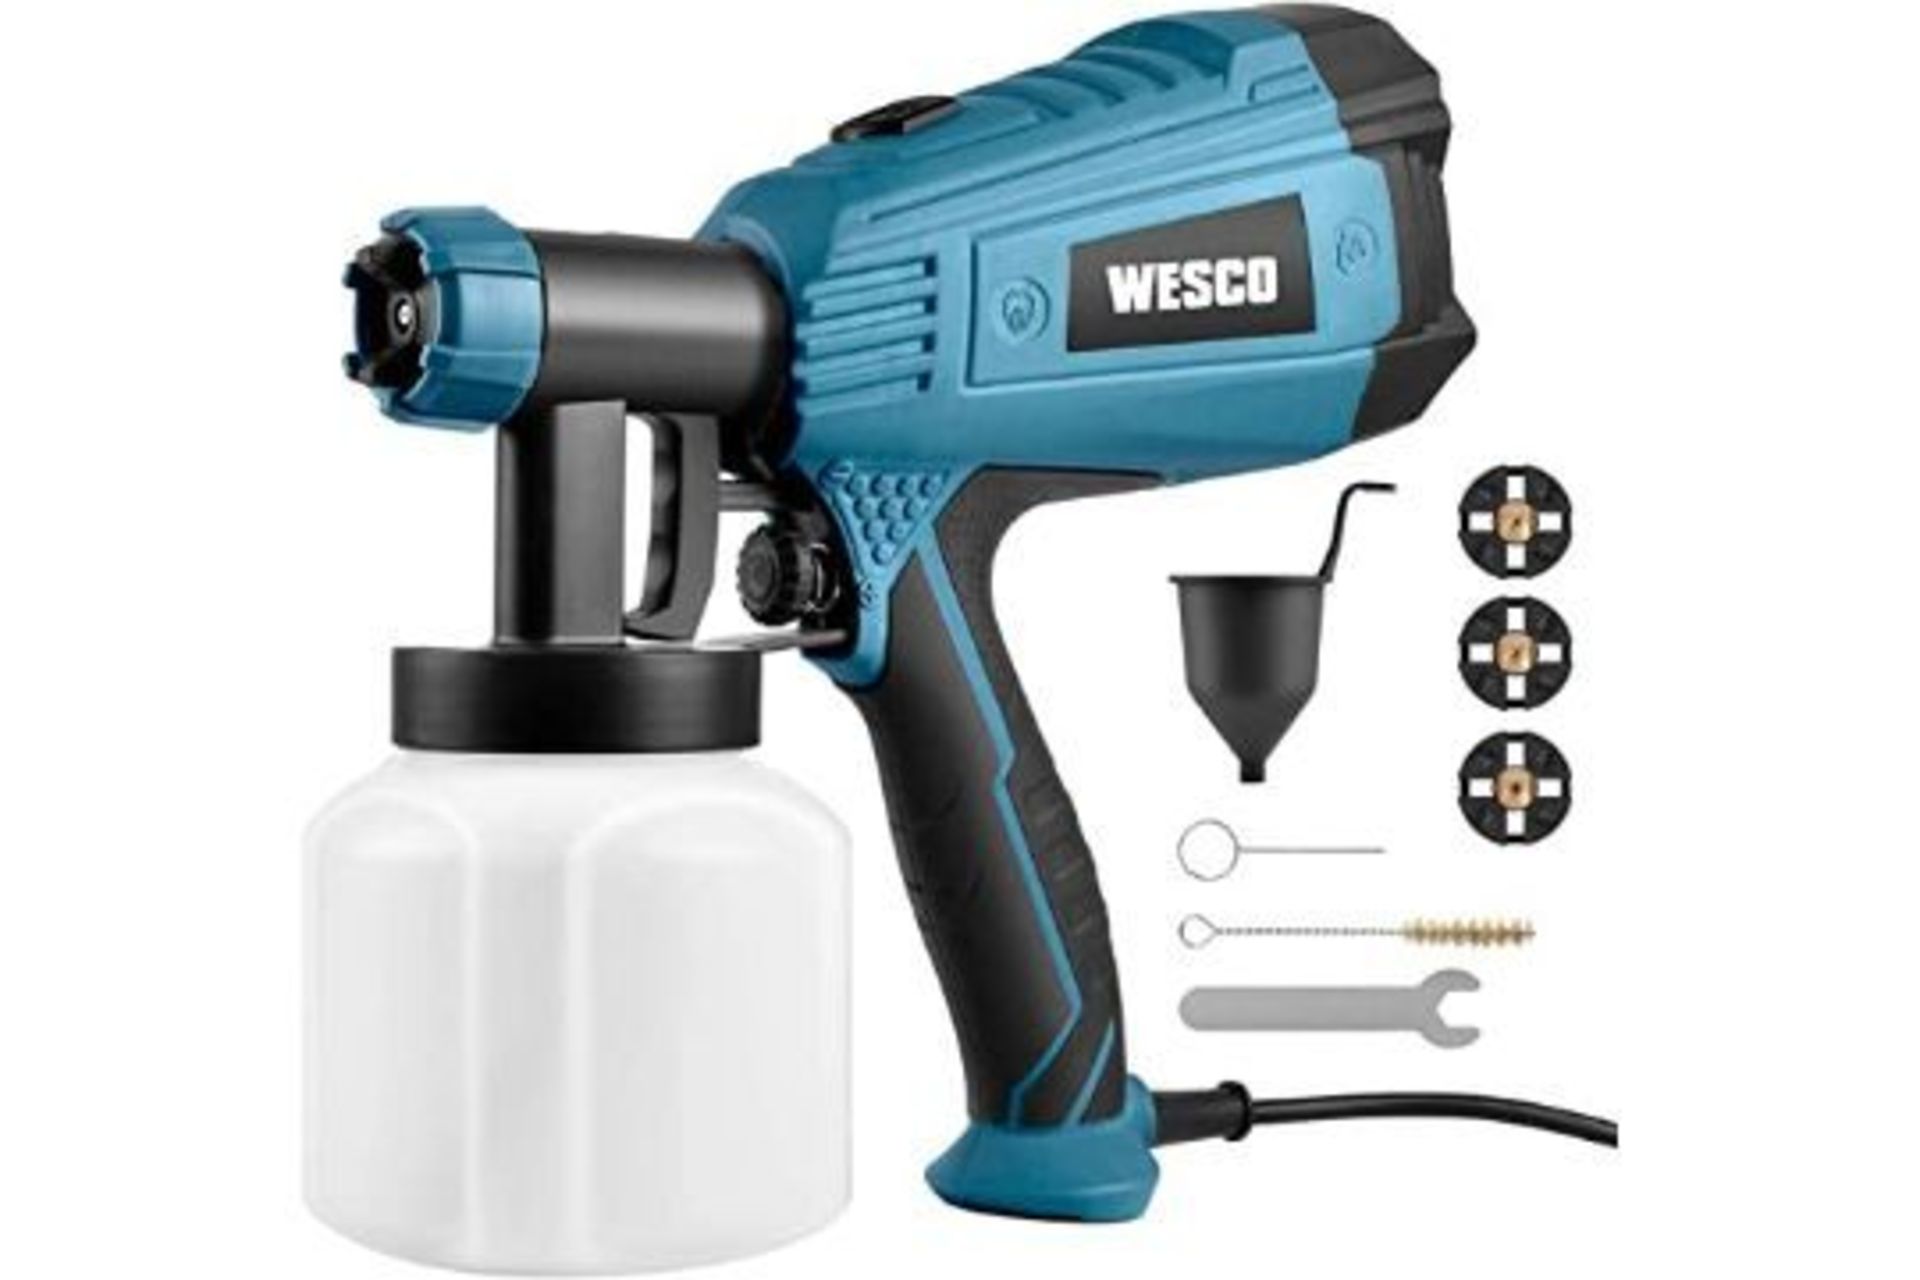 3 x NEW BOXED WESCO 500W Electric Paint Spray Gun with 3 Nozzles(1.5/1.8/2.0mm), 800ml/min Max Air